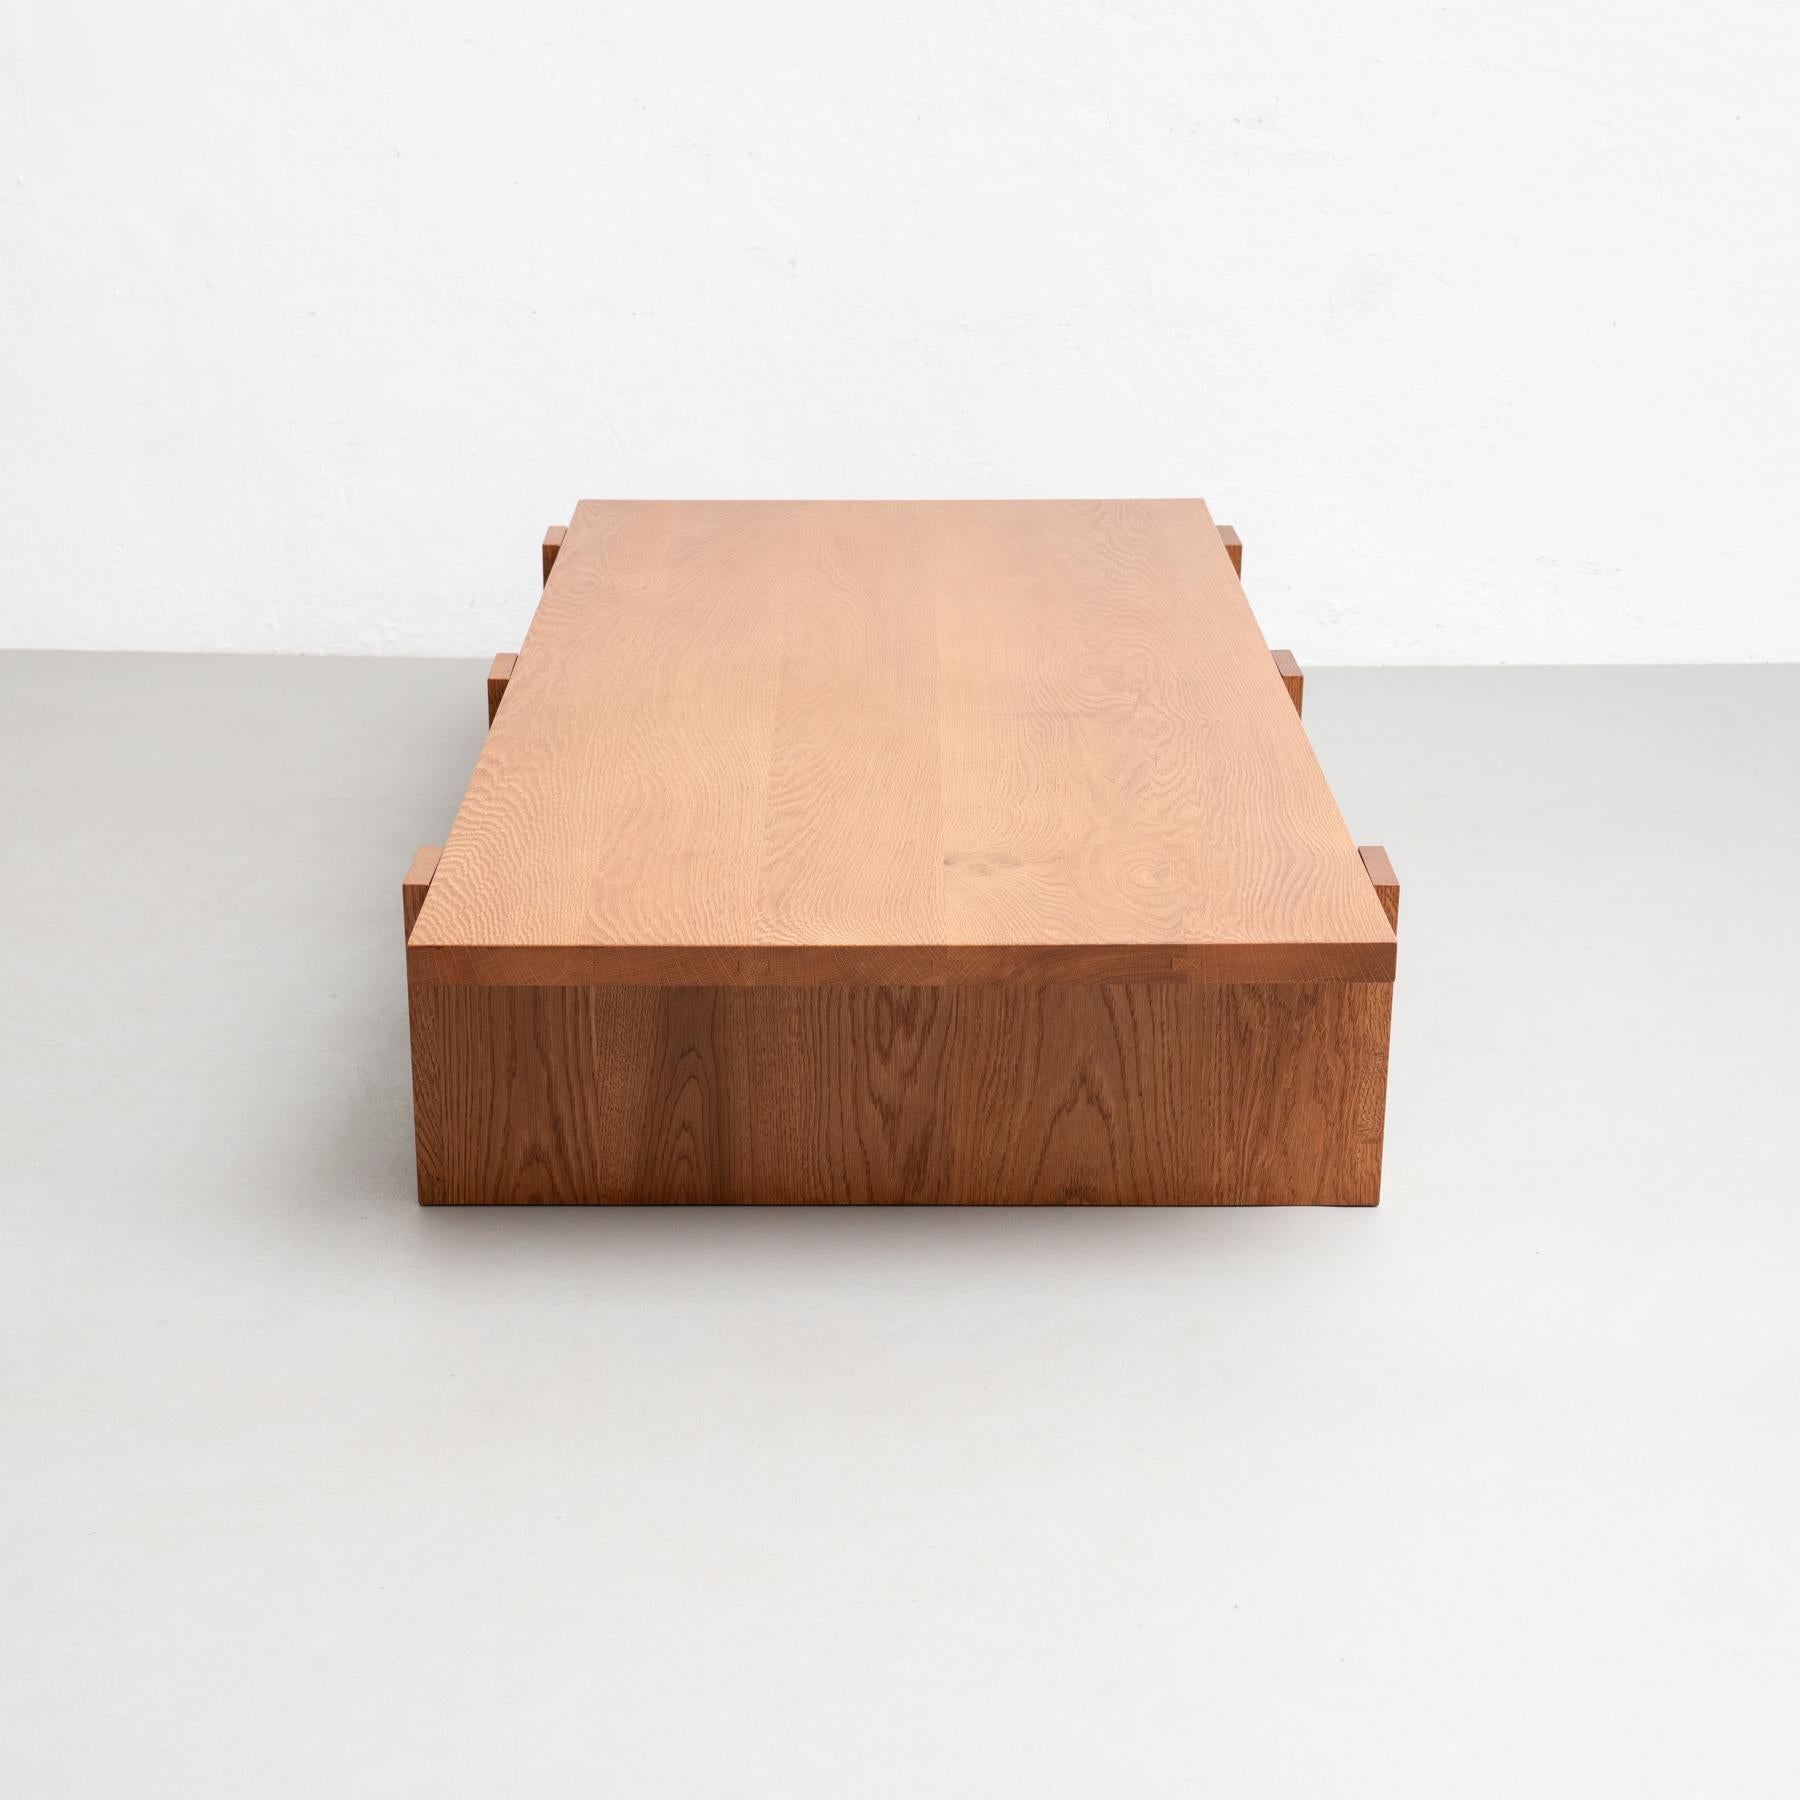 Dada Est. Contemporary Solid Oak Low Table  For Sale 4